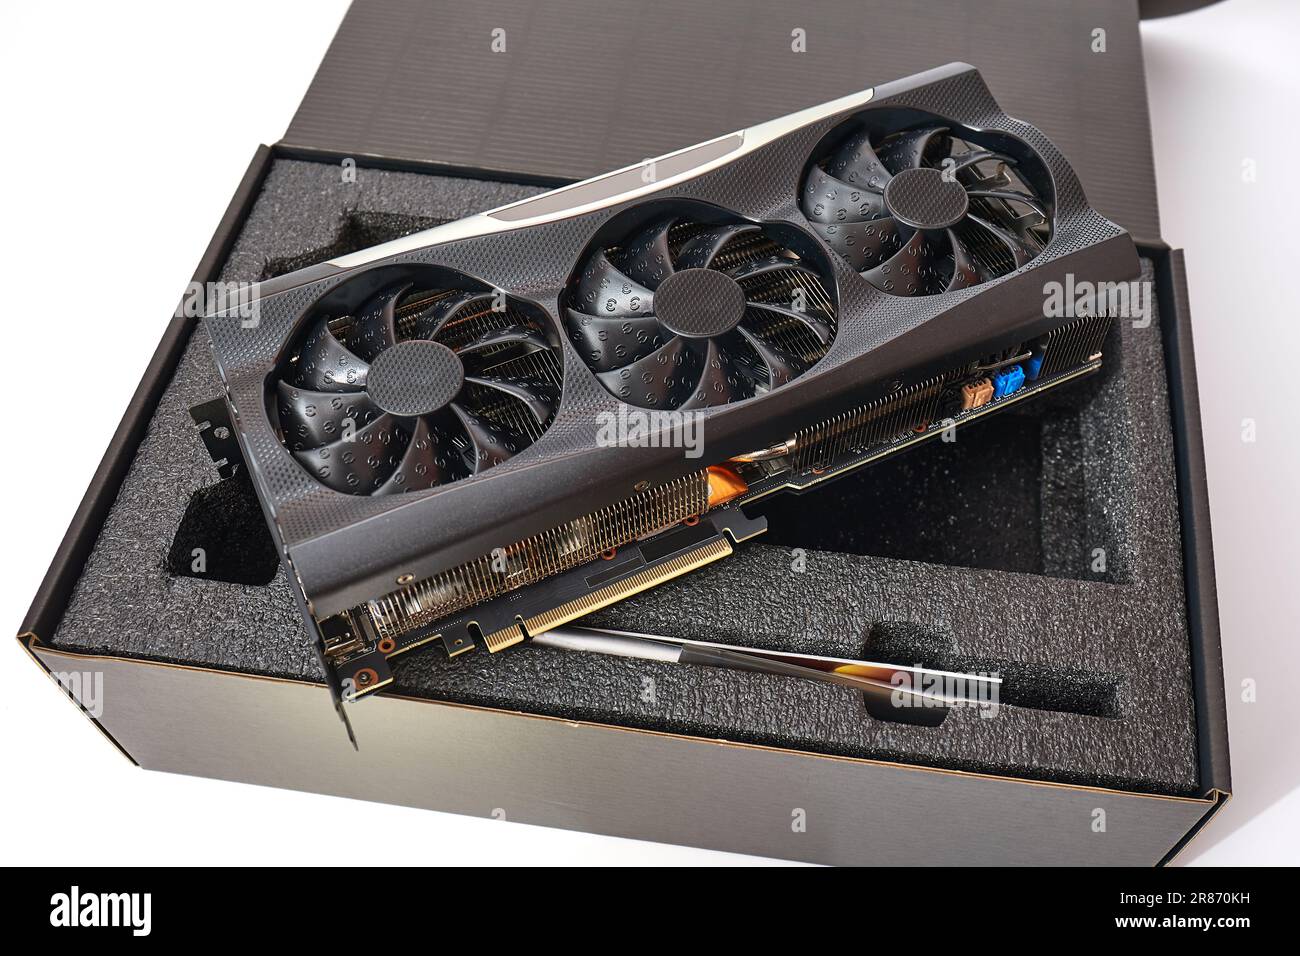 Computer graphics card on a desk Stock Photo